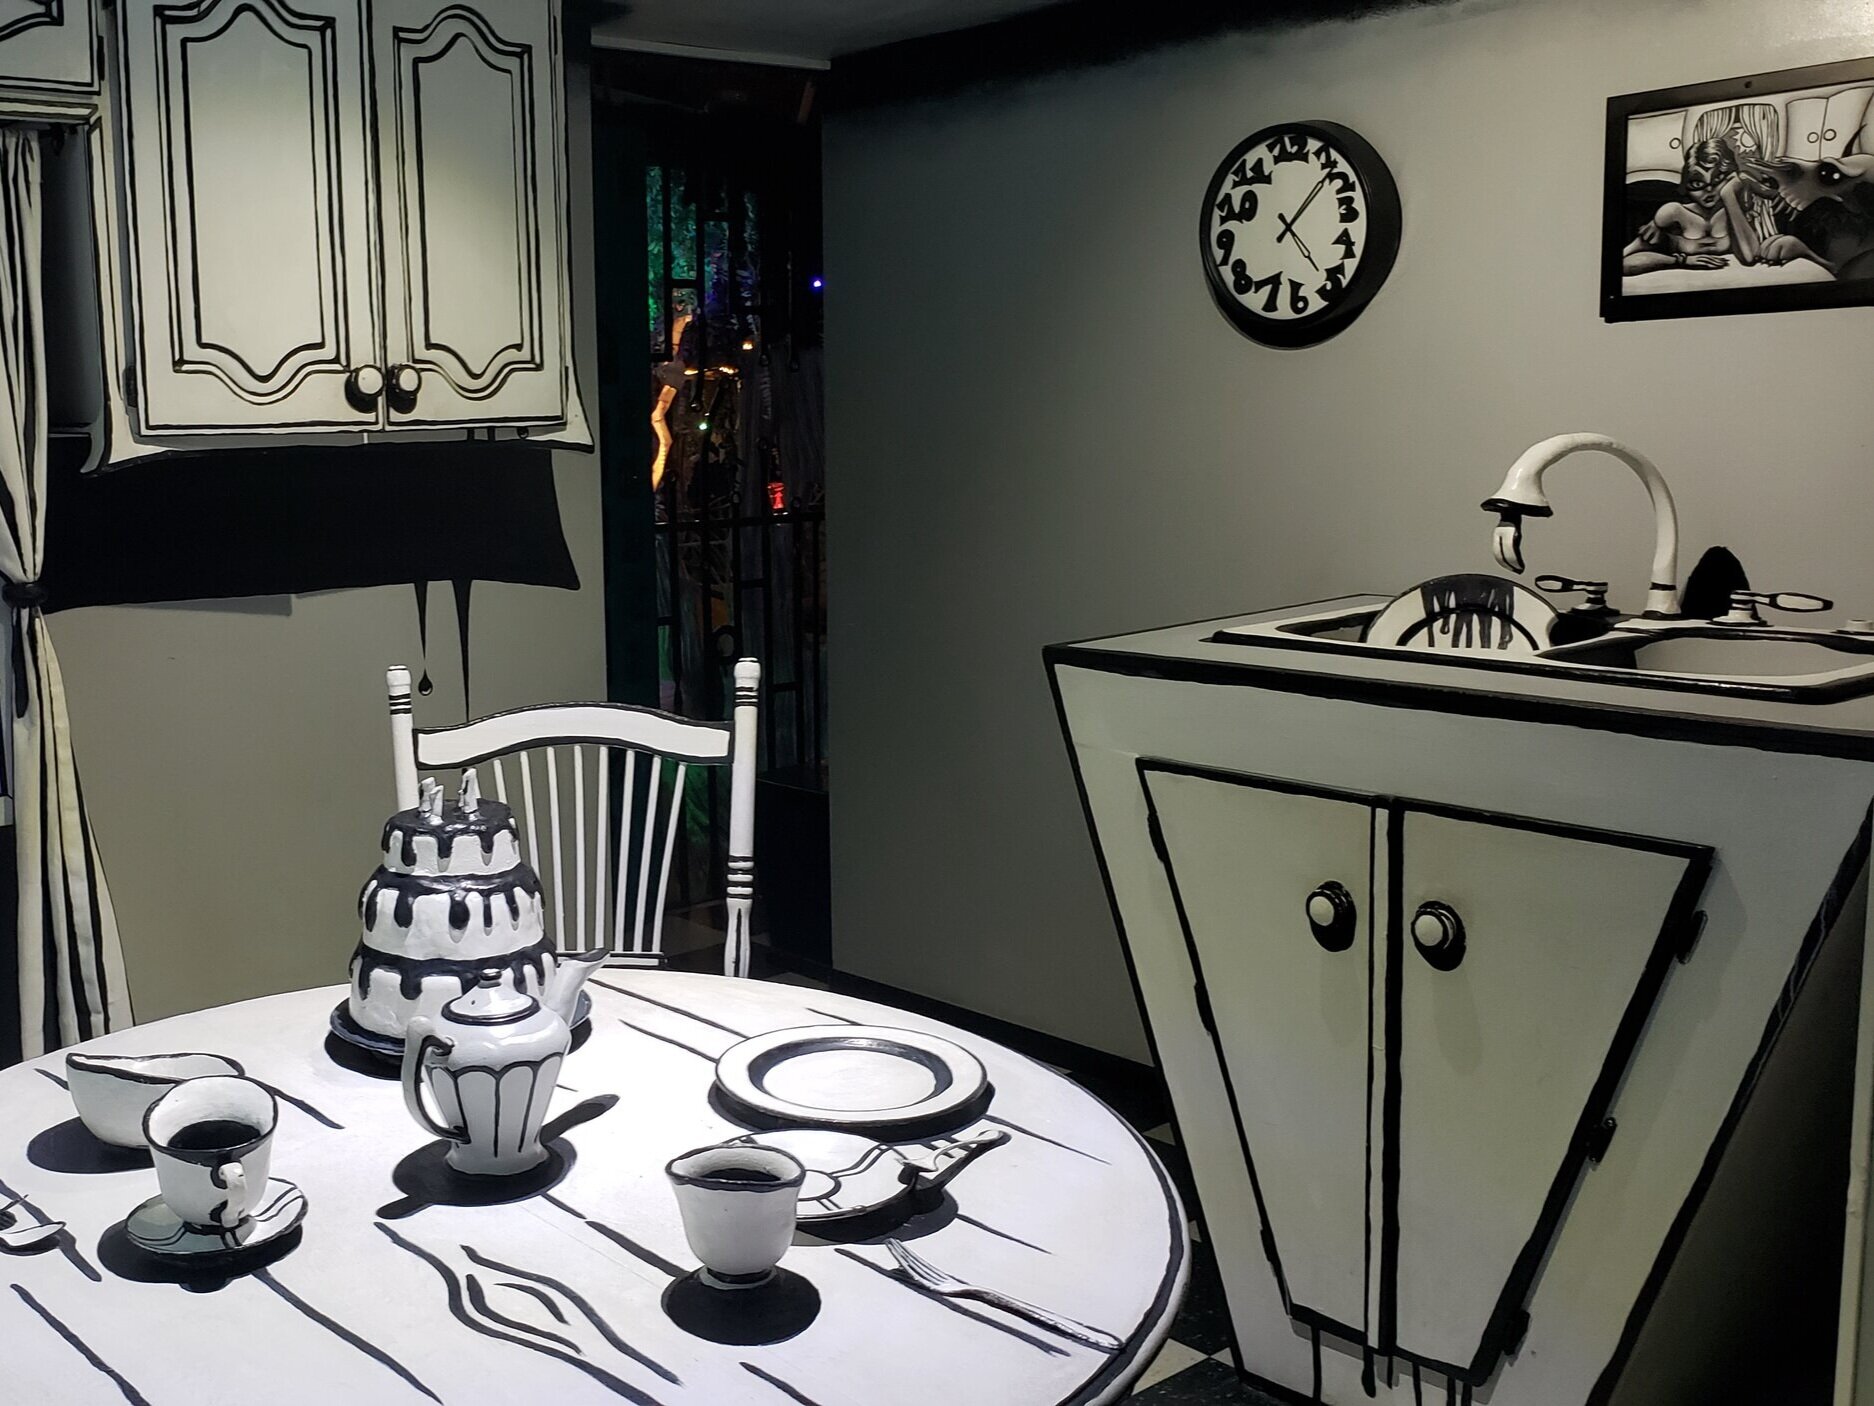 Art exhibit showing a kitchen designed in all black and white